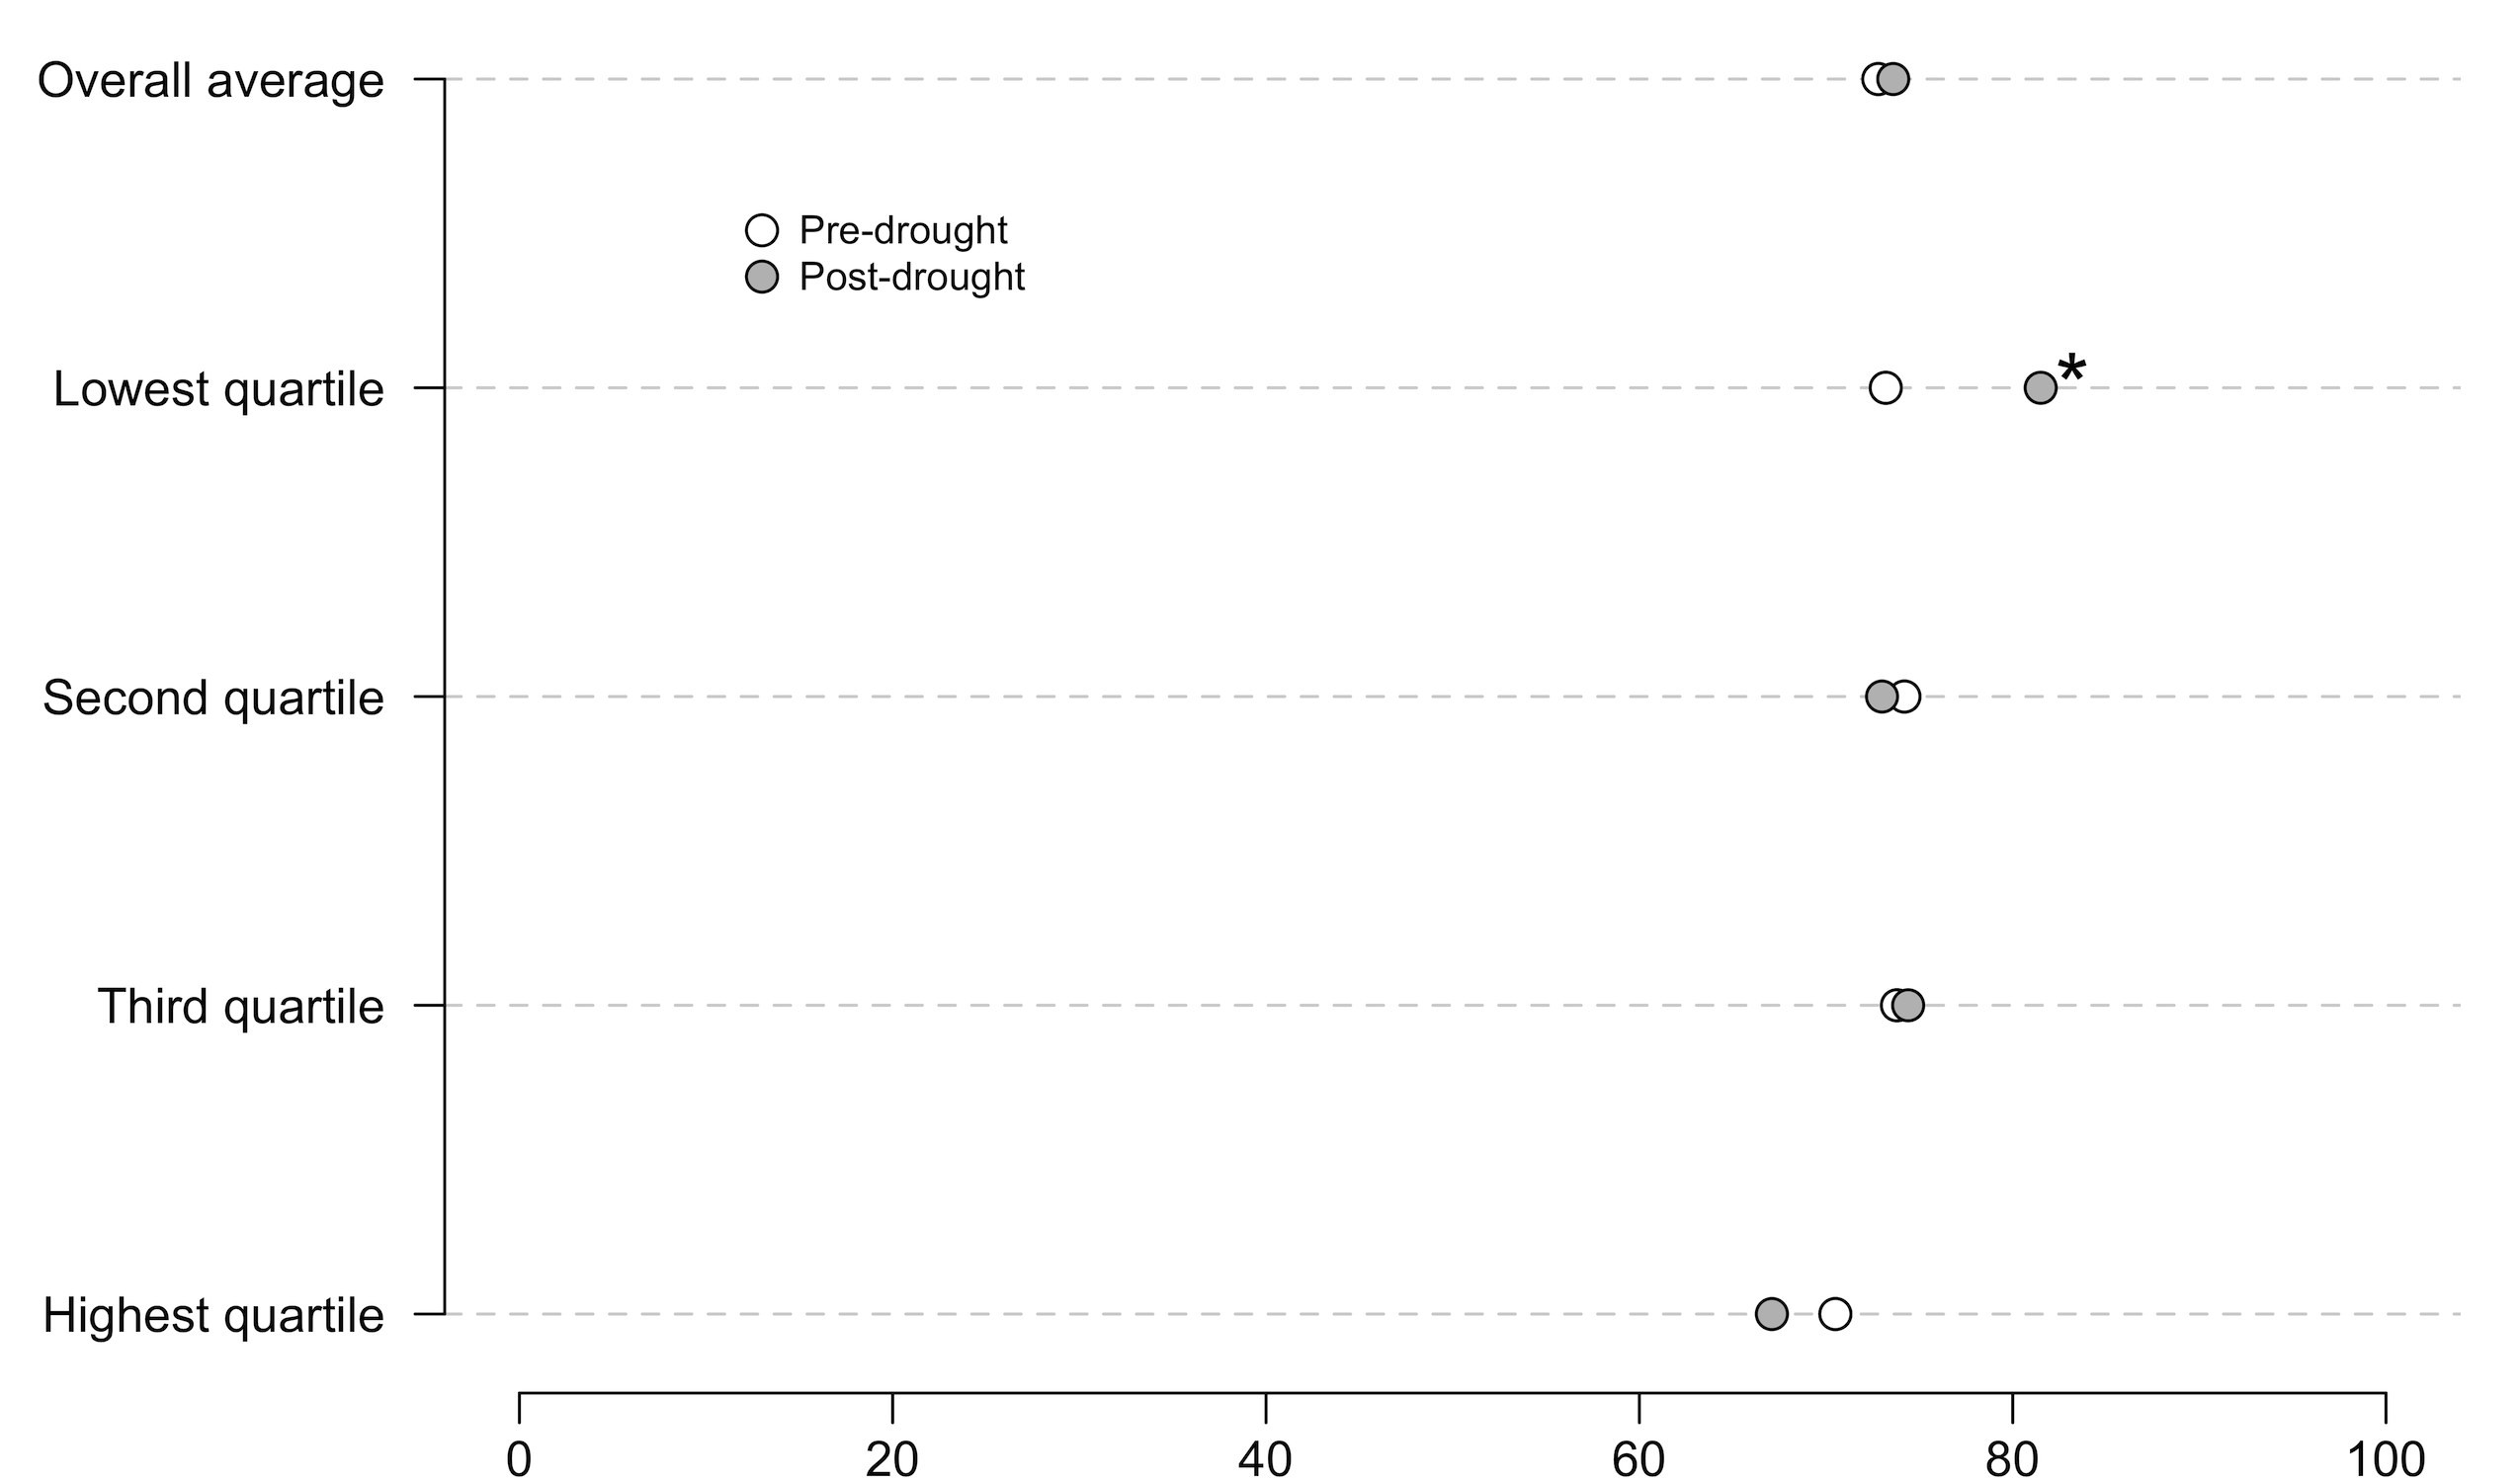 Standard dot plot comparing climate change beliefs pre- and post-drought